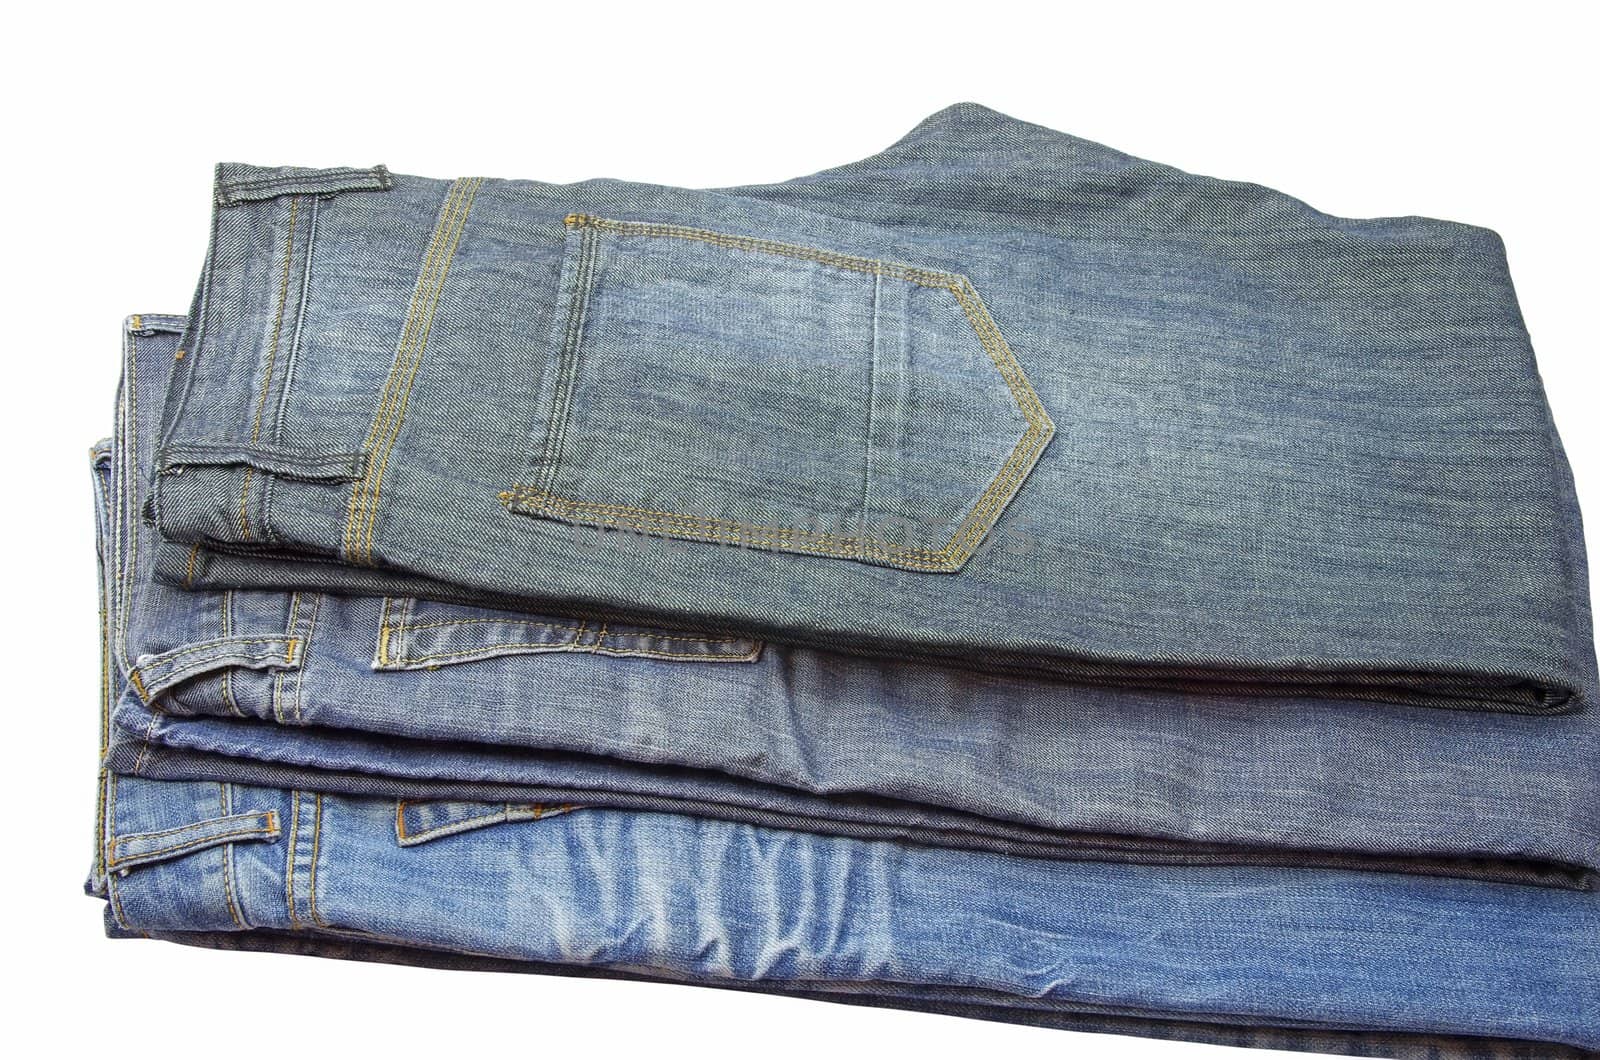 Folded pairs of jeans on white